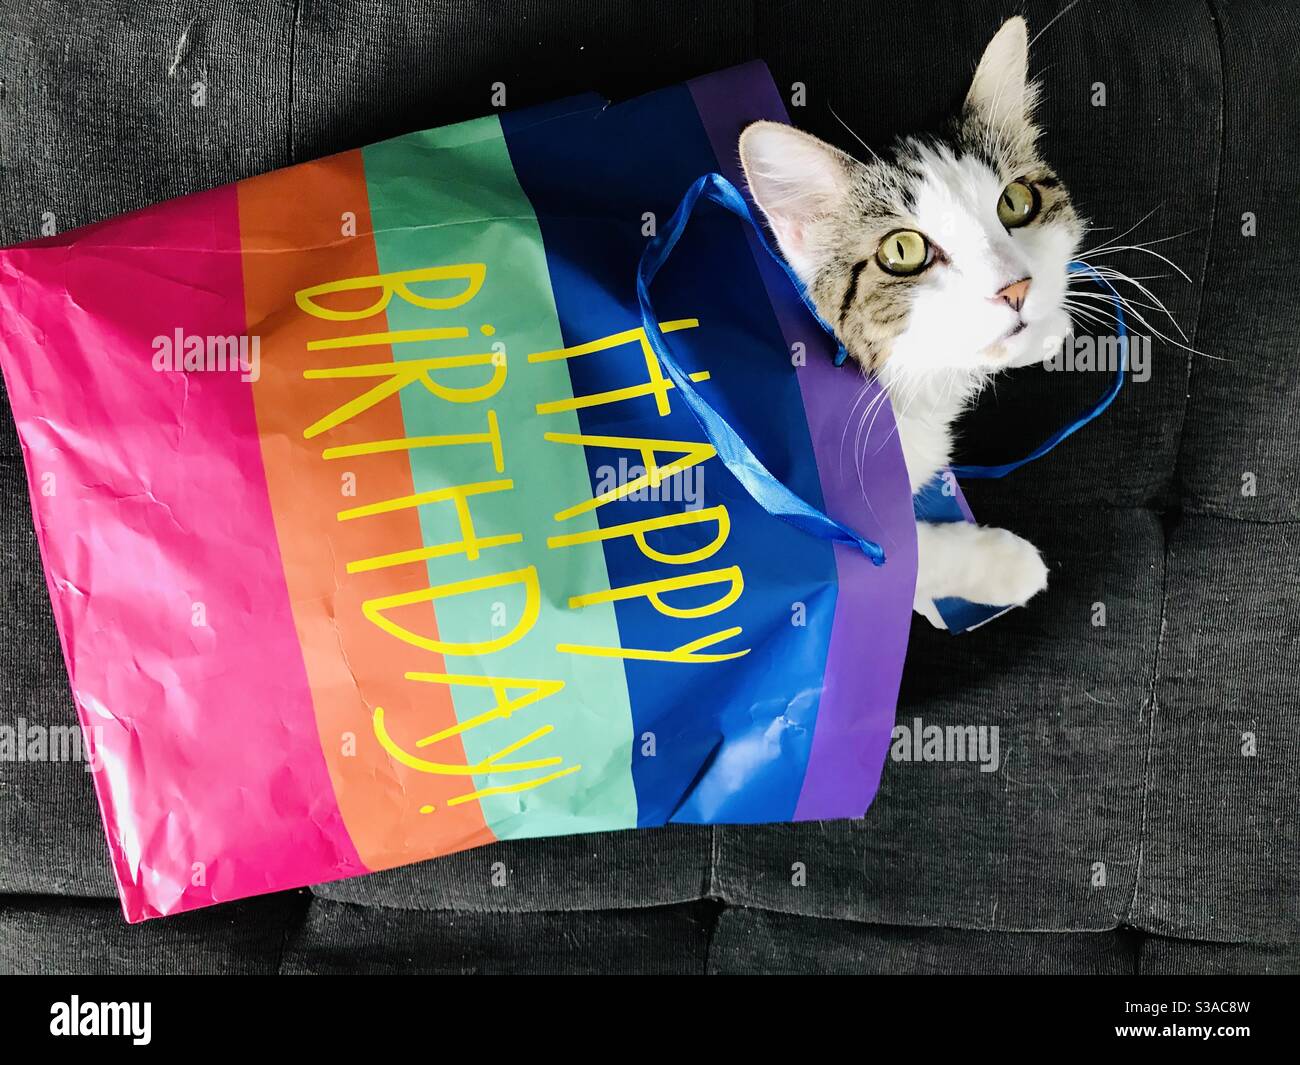 A cat peeks out of a colorful Happy Birthday bag and looks at the camera. Stock Photo